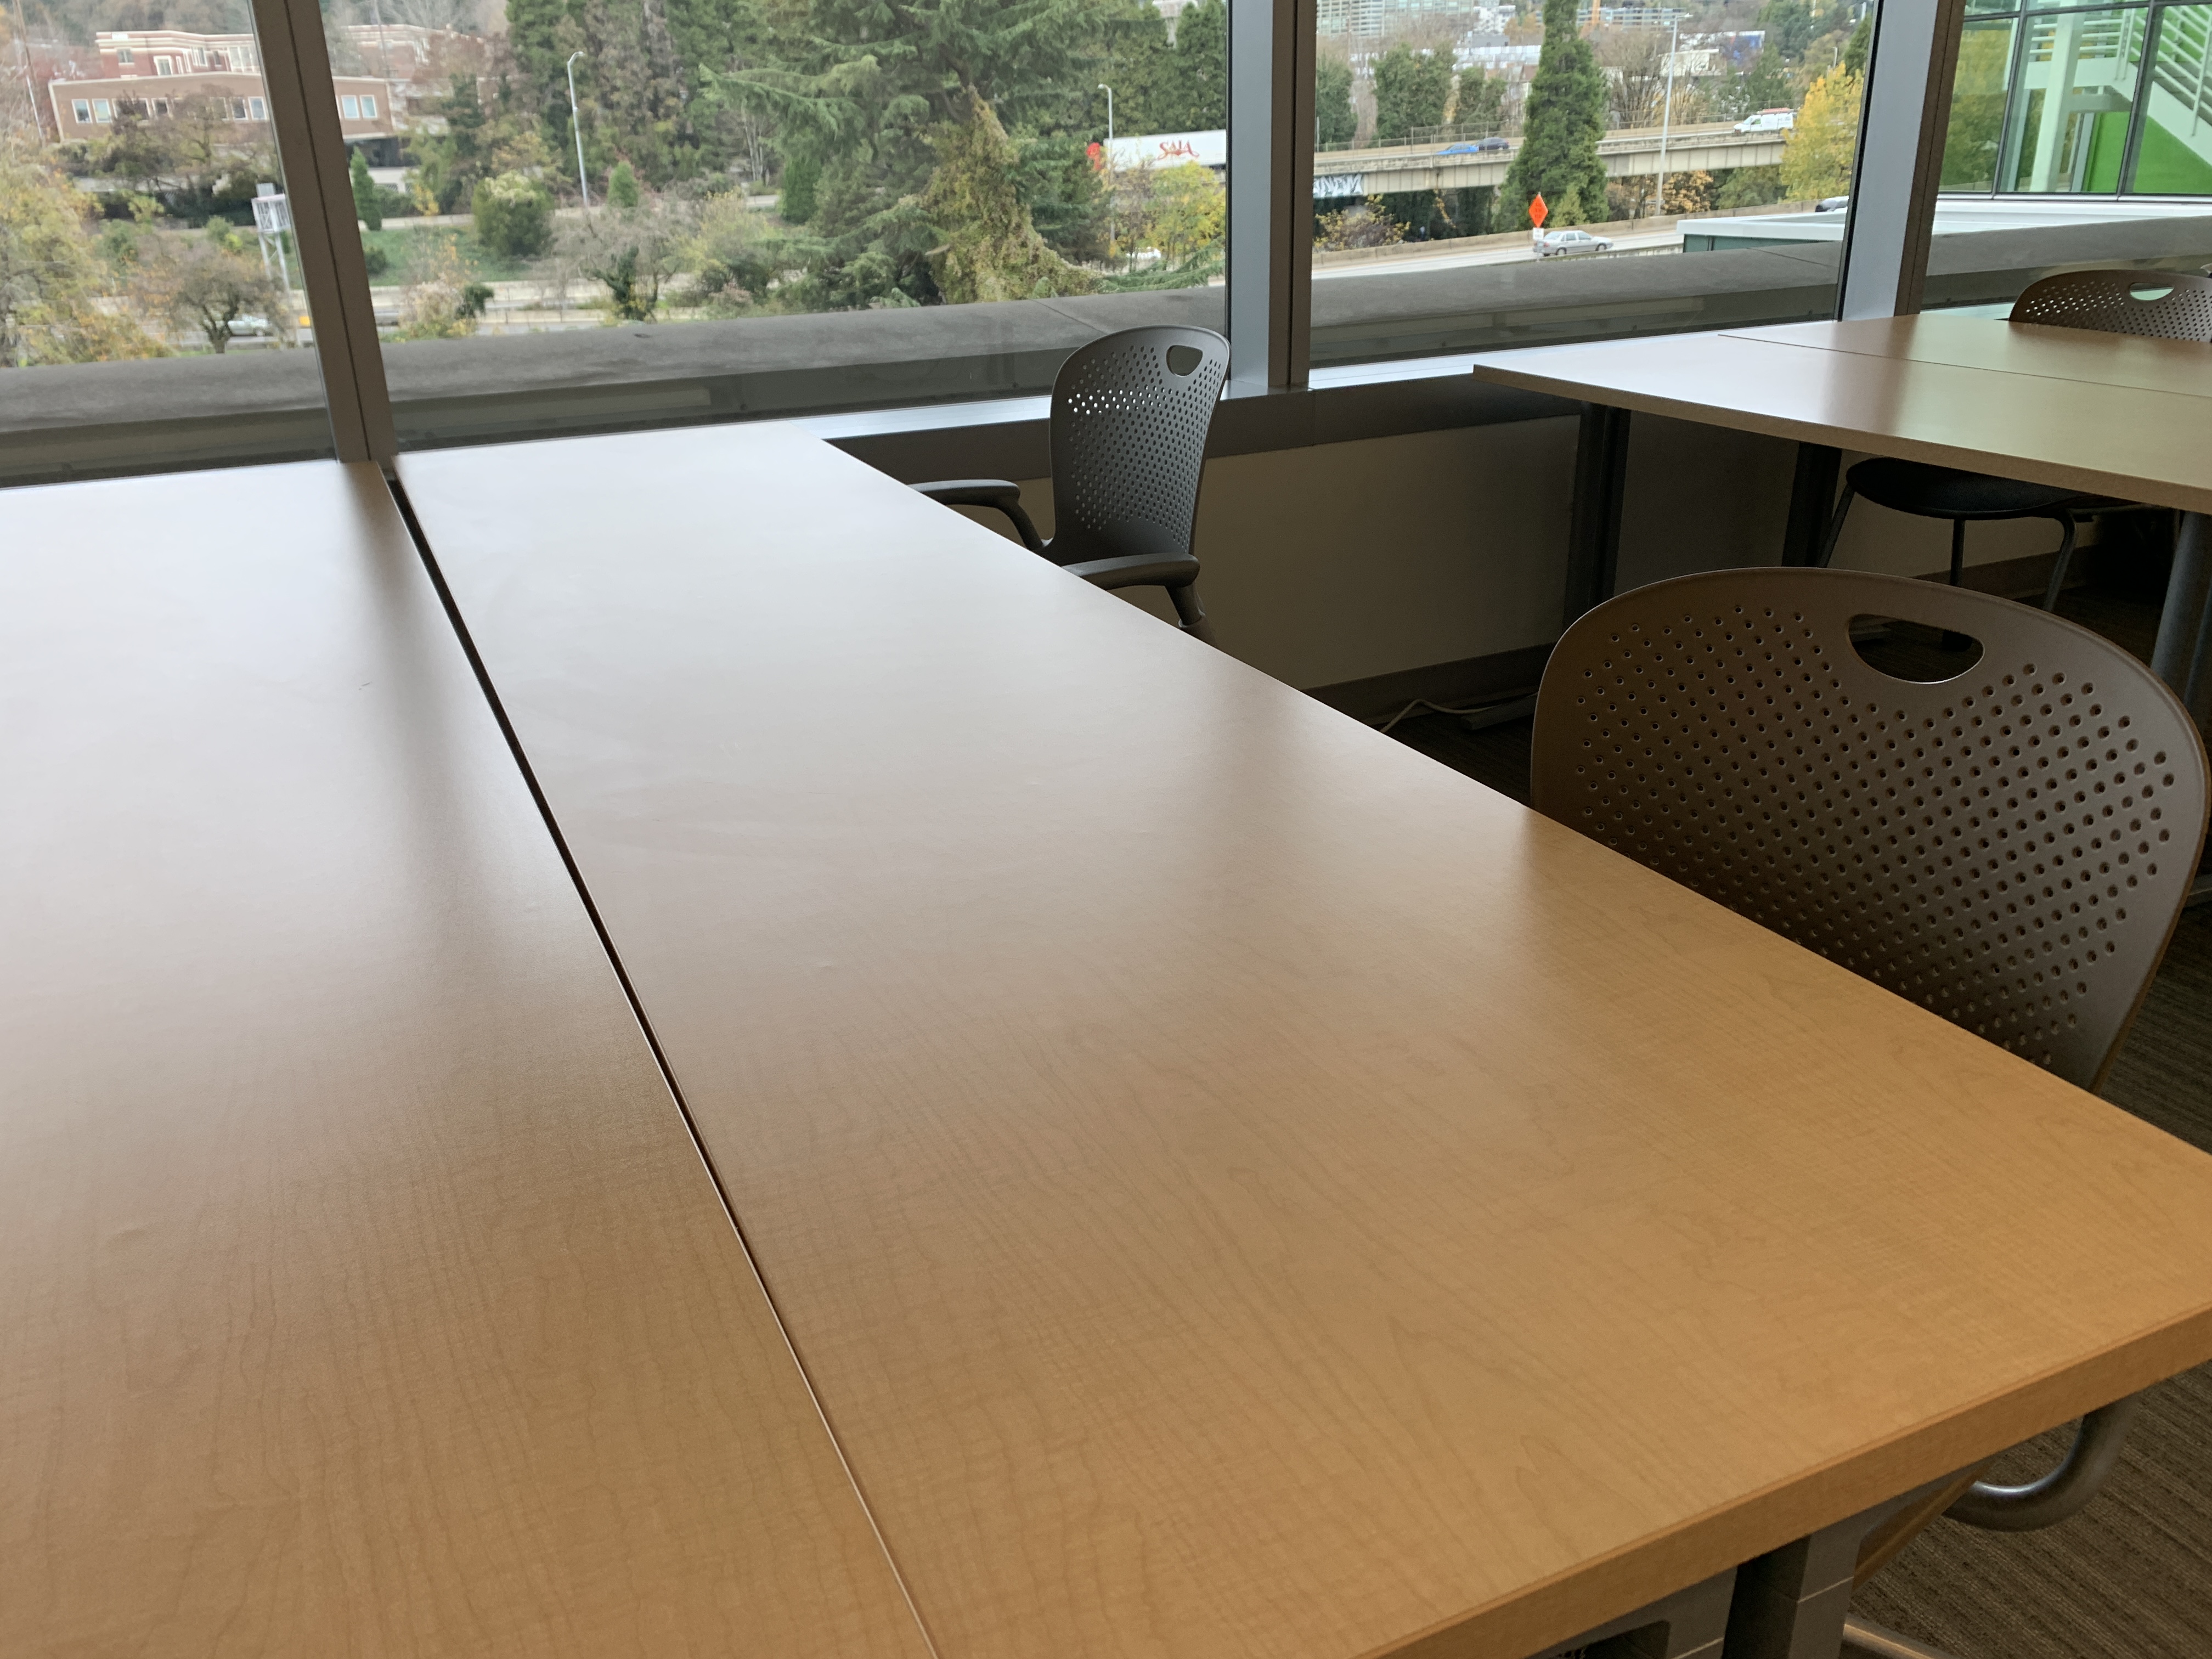 A large work table in a library space with two chairs pulled up. In the background is a wall of windows.